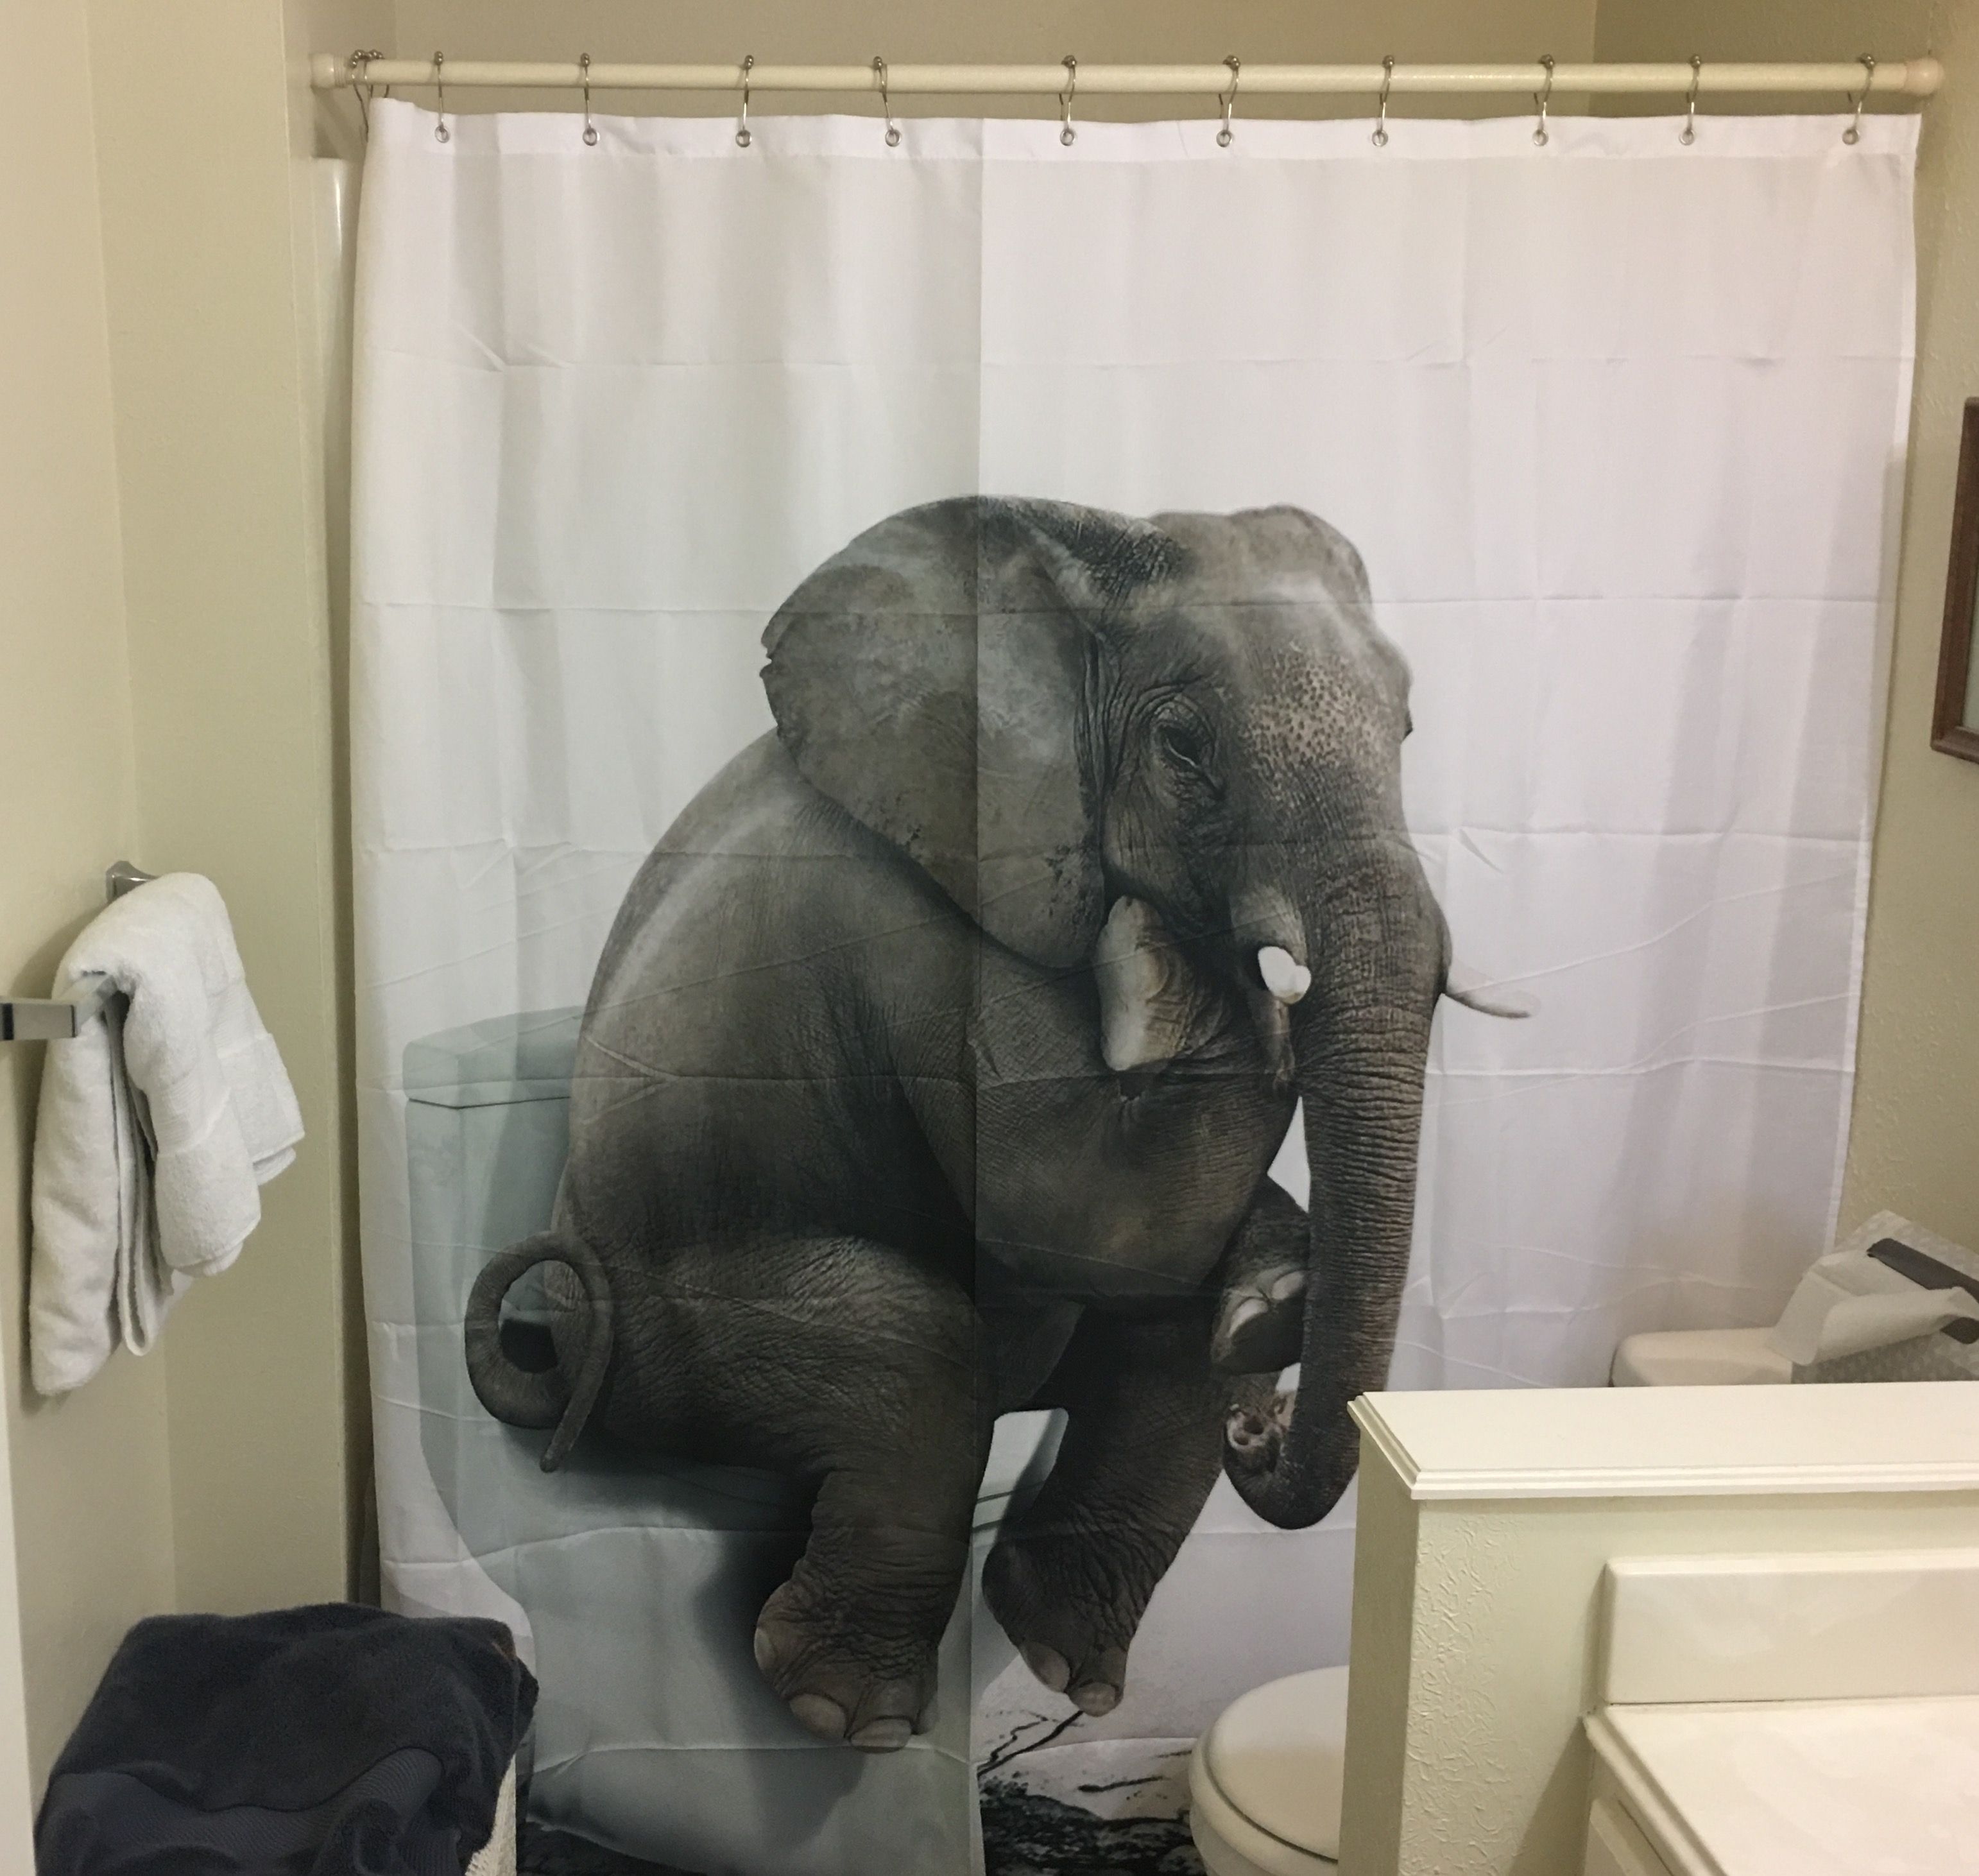 I need a new shower curtain, guess I'll just google "awesome shower curtain"